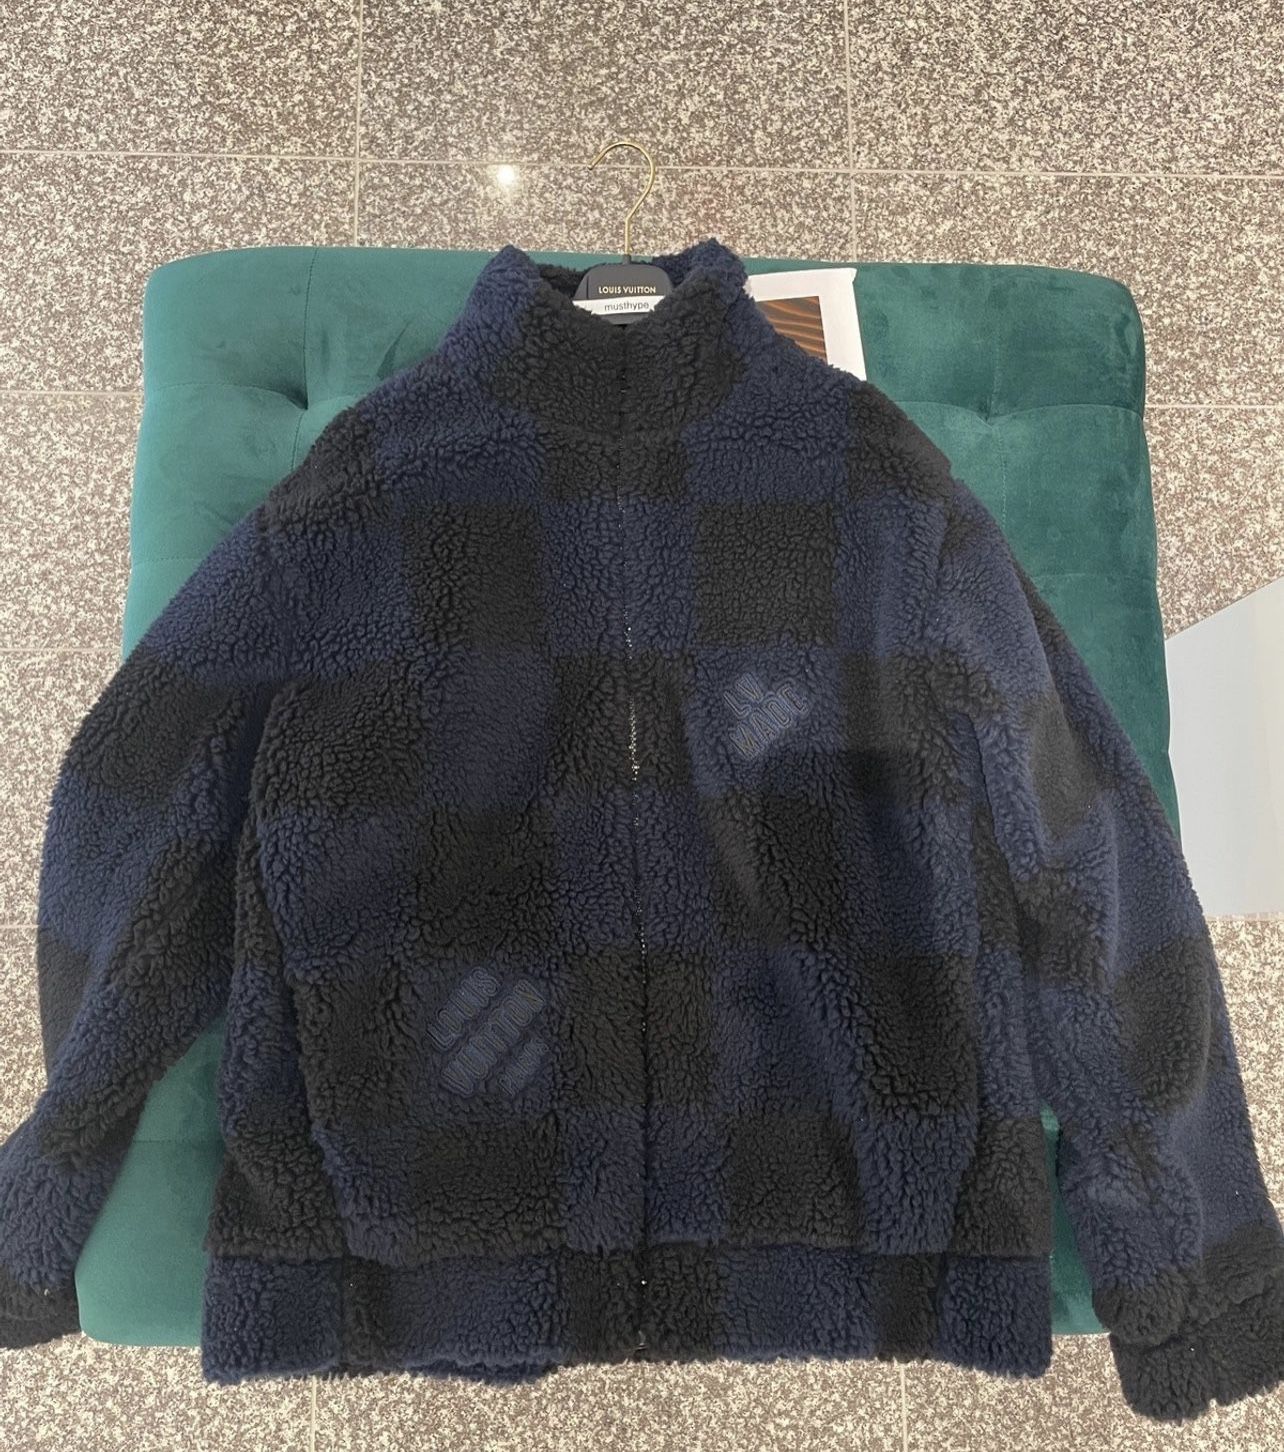 Louis Vuitton X Nigo jacket size M ( posted on Grailed as well, so